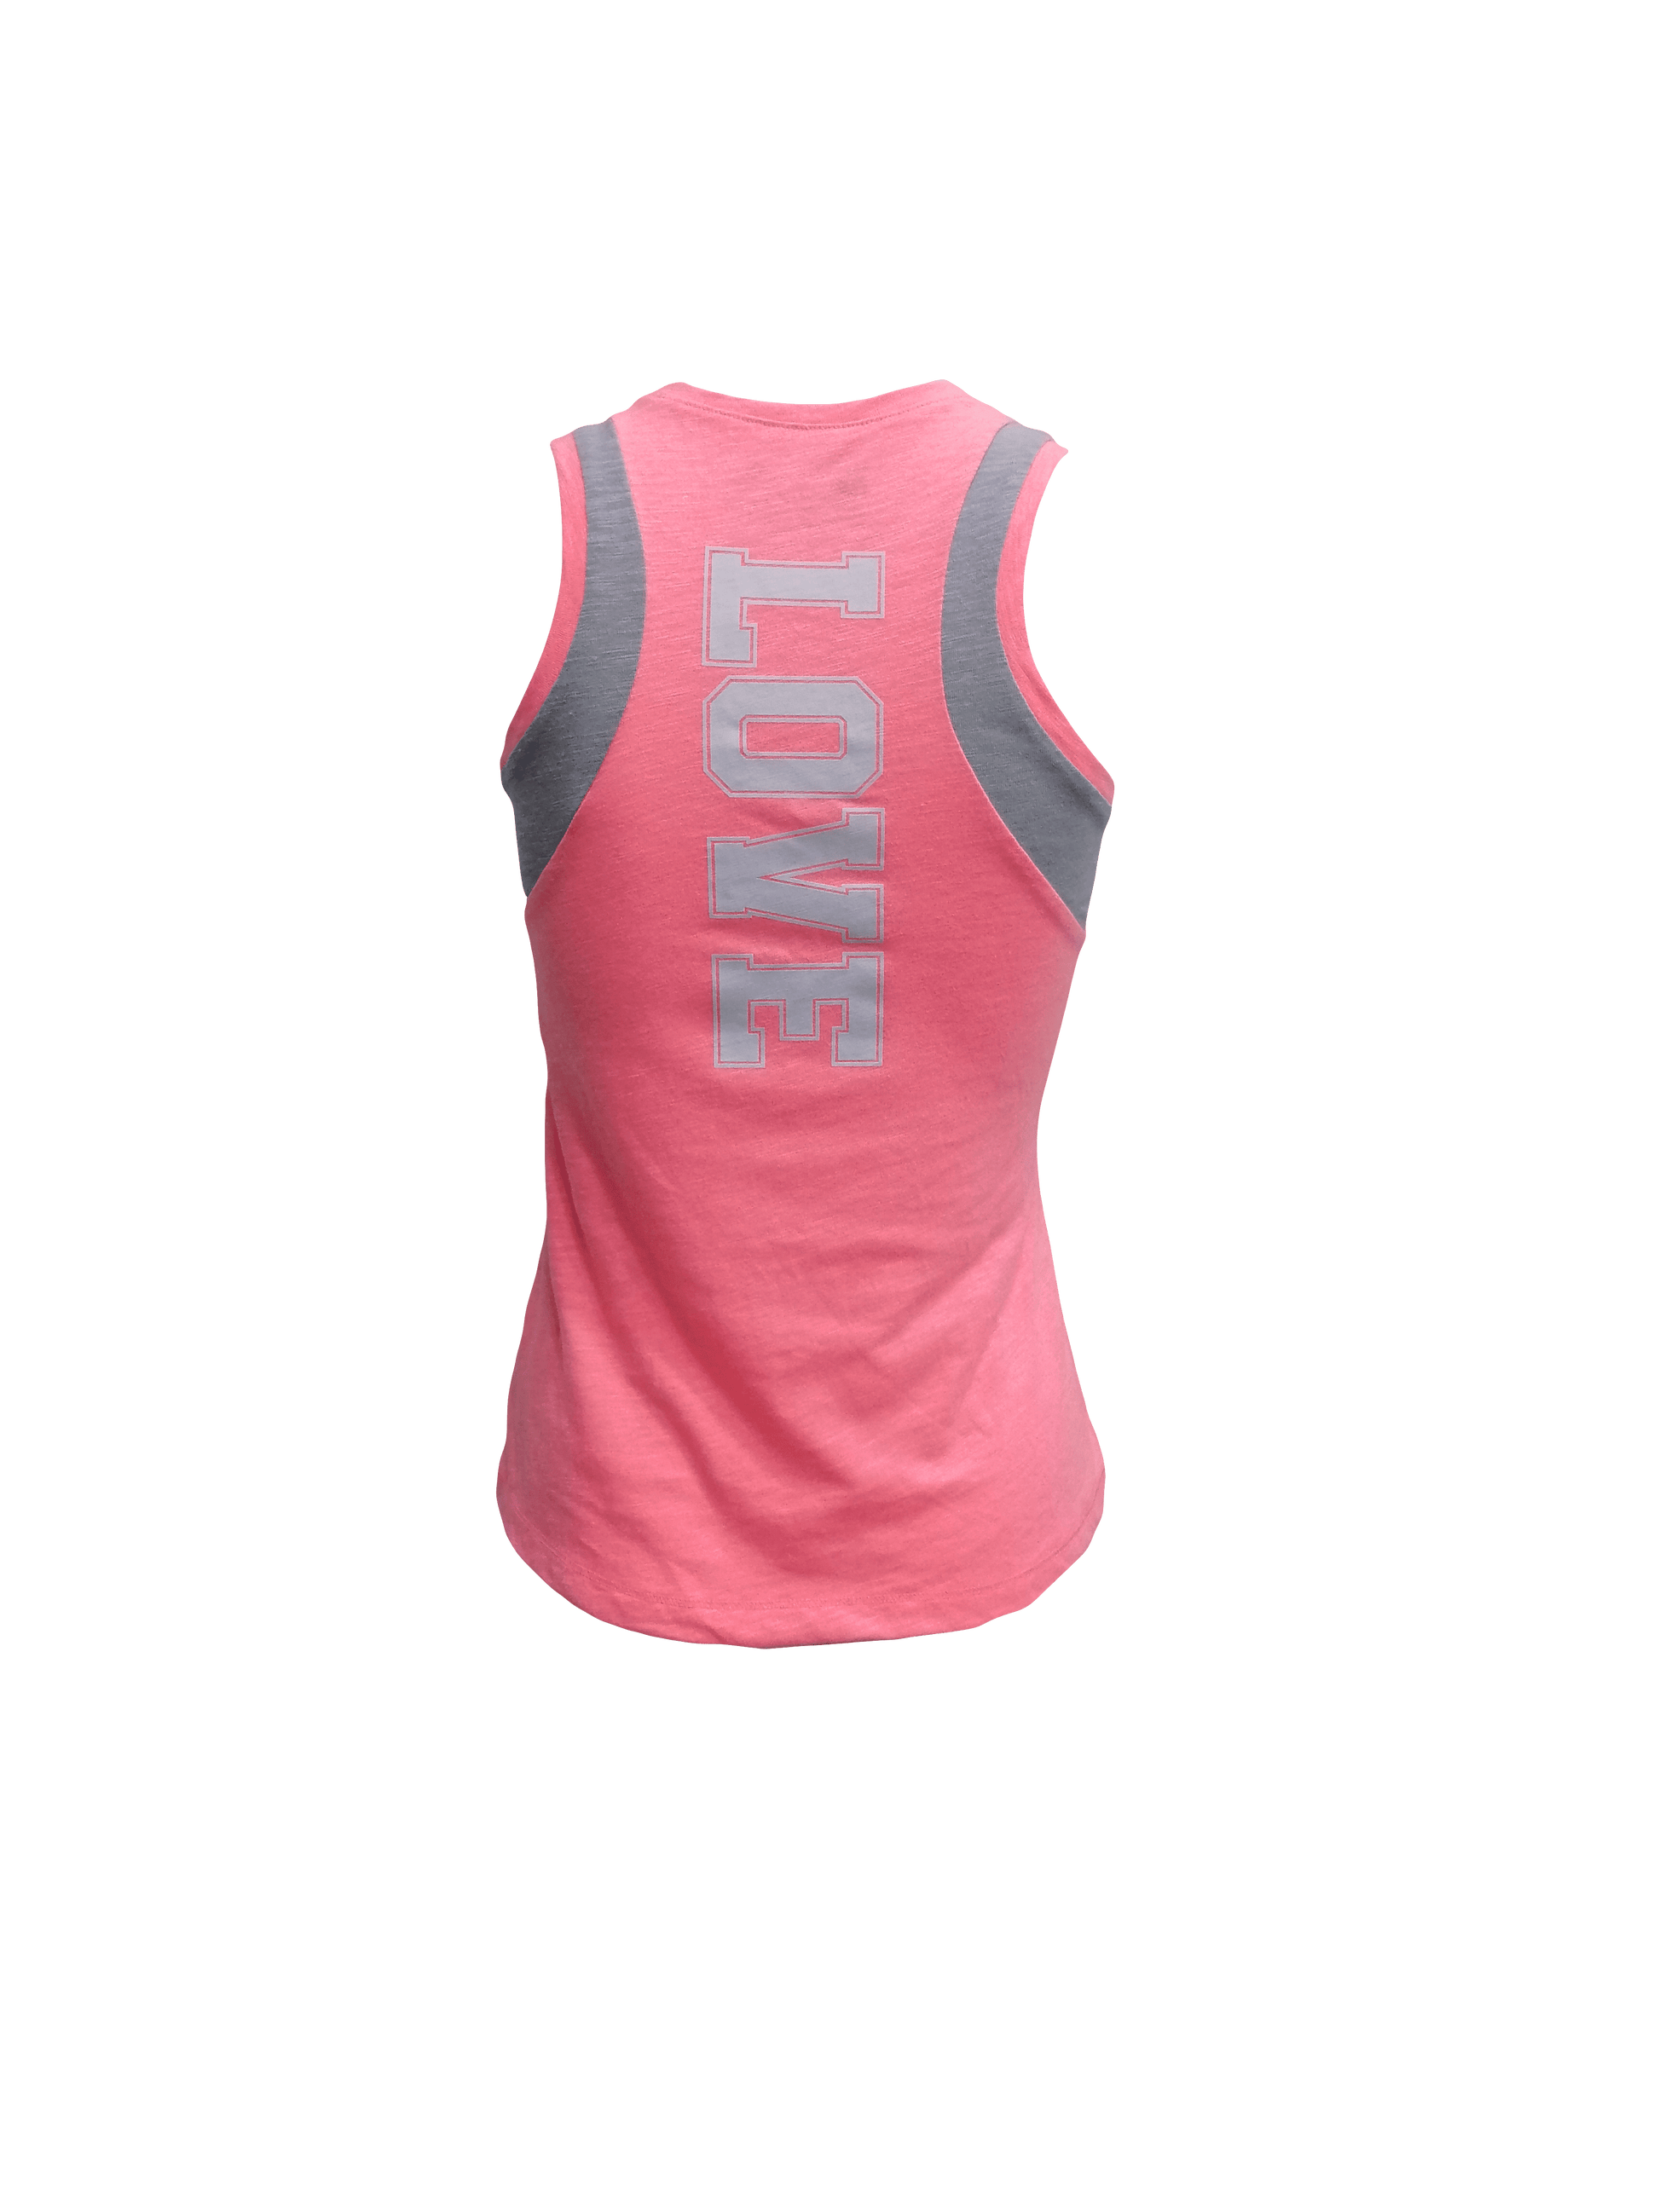 Xersion Womens Tops X-Small / Pink Squad Tank Top